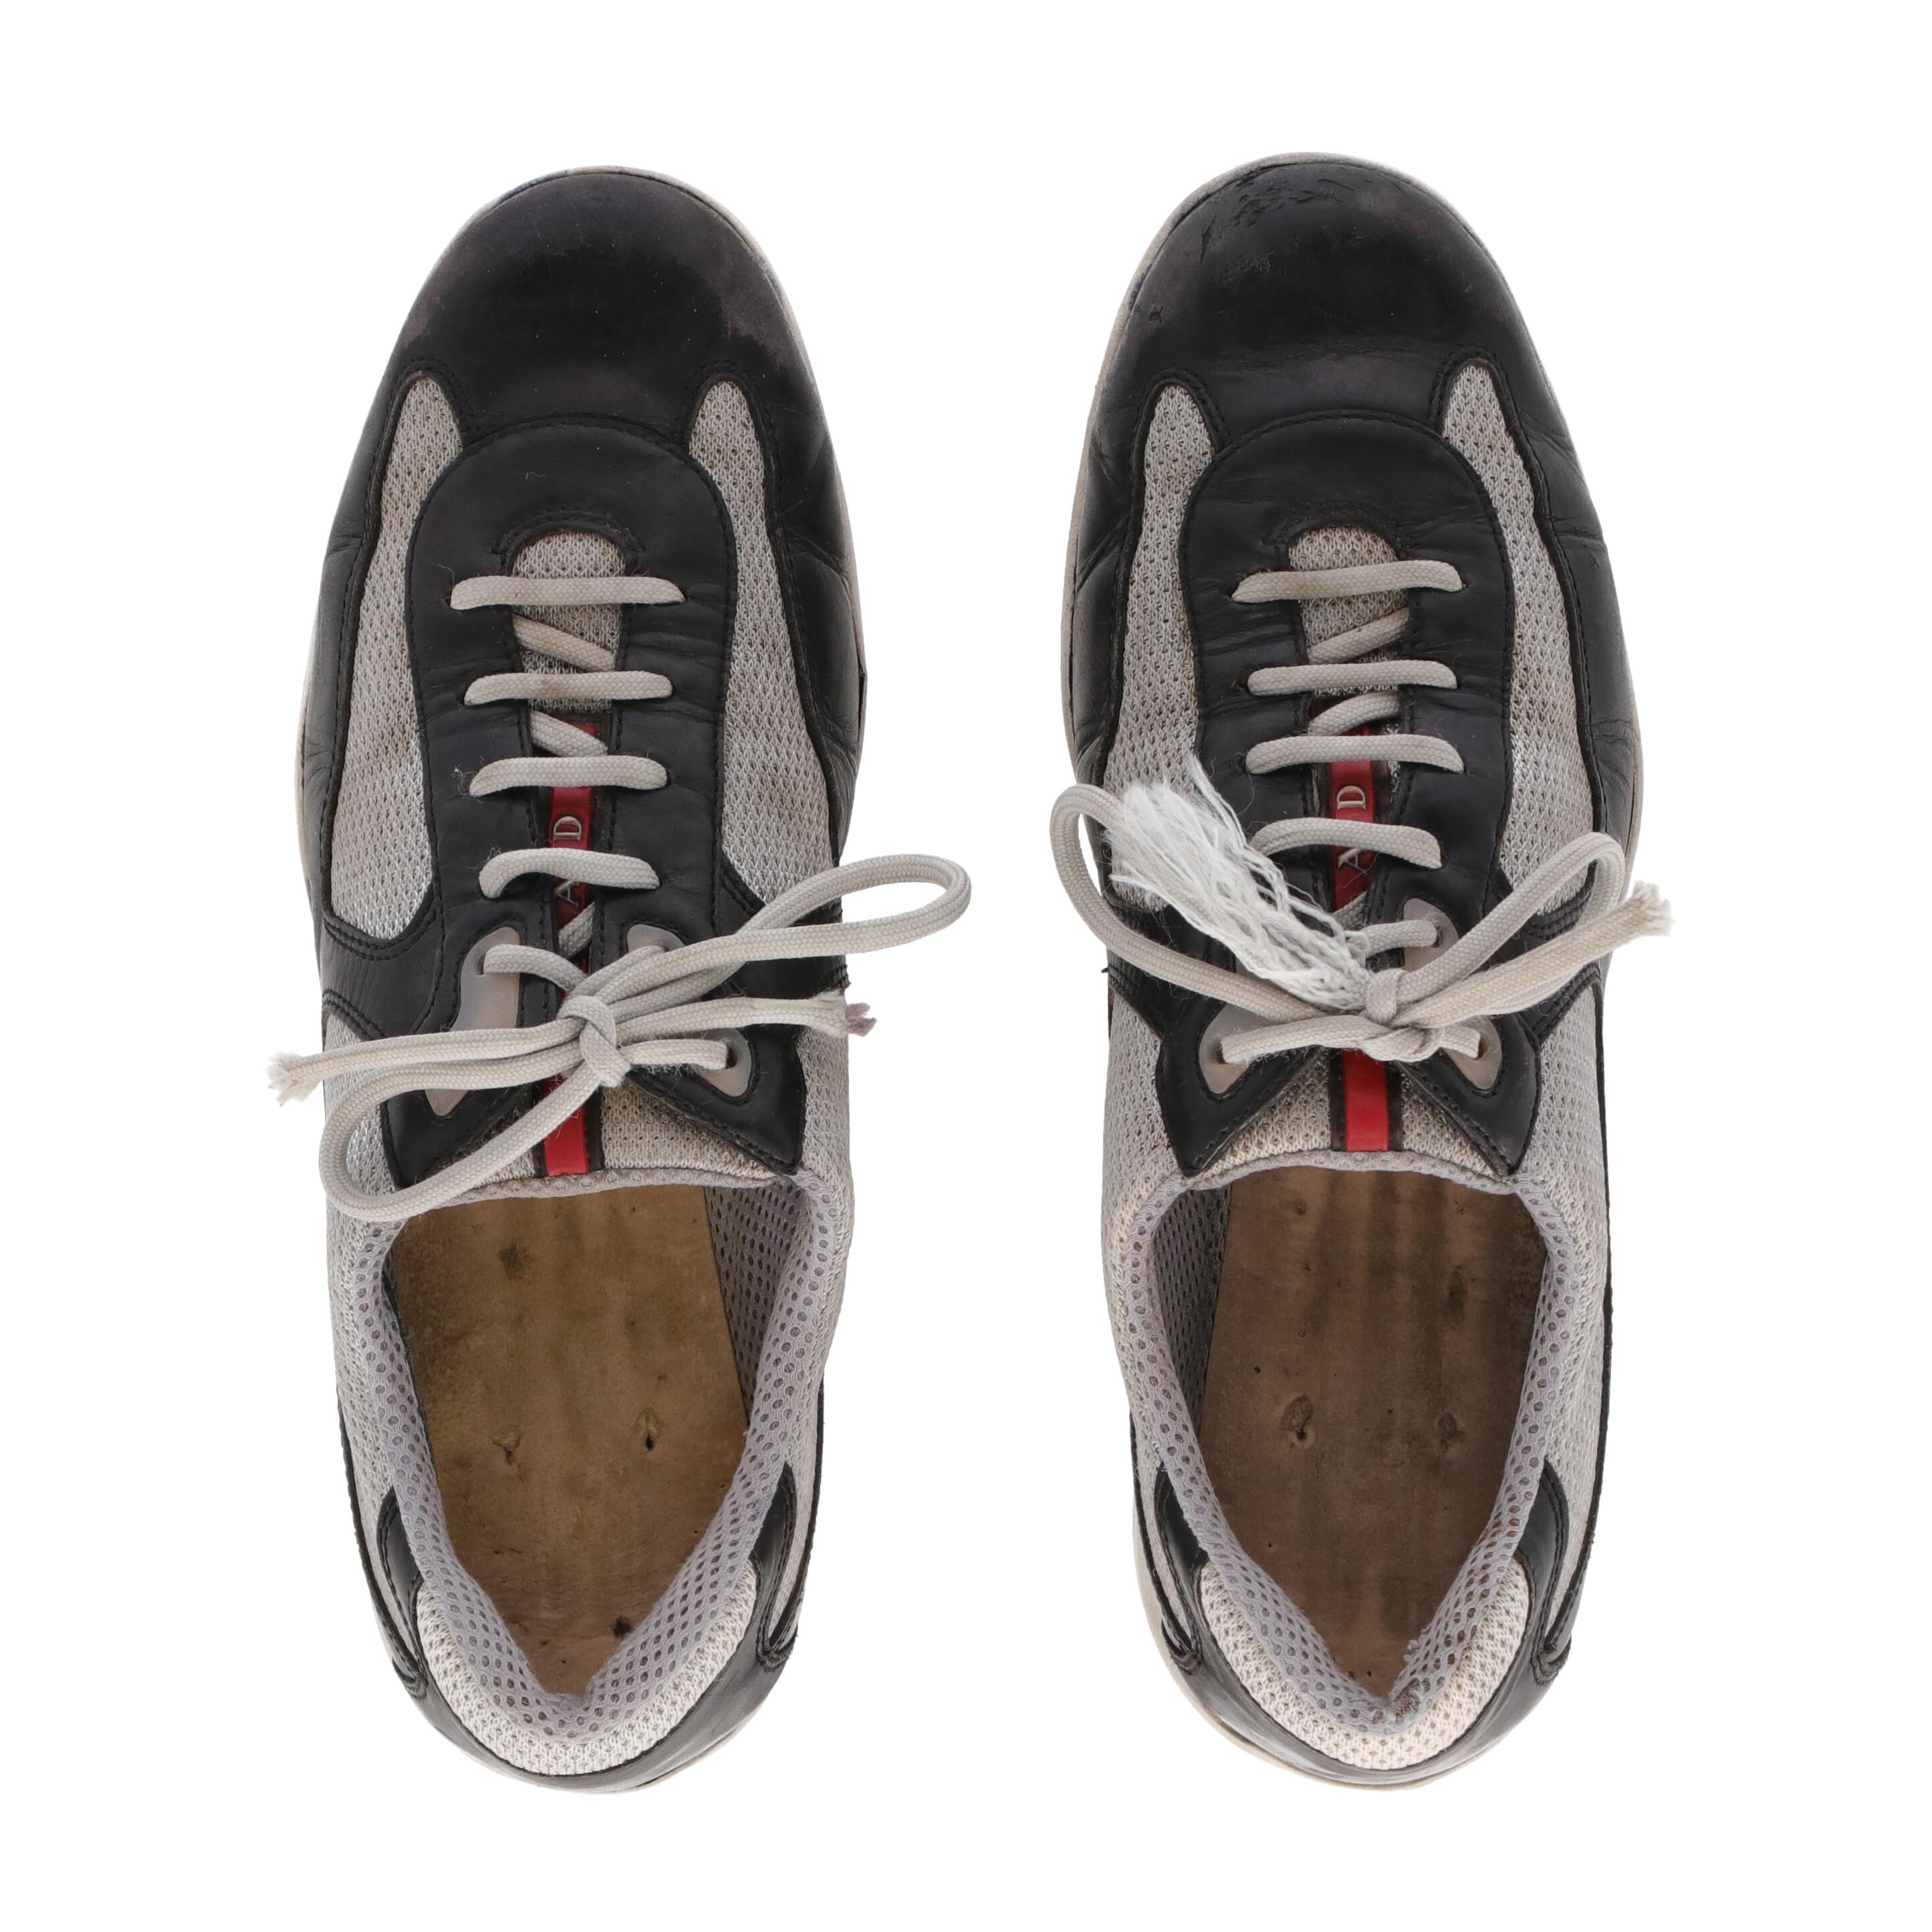 Gray 2000s Prada Bicolor Lace-up Shoes For Sale